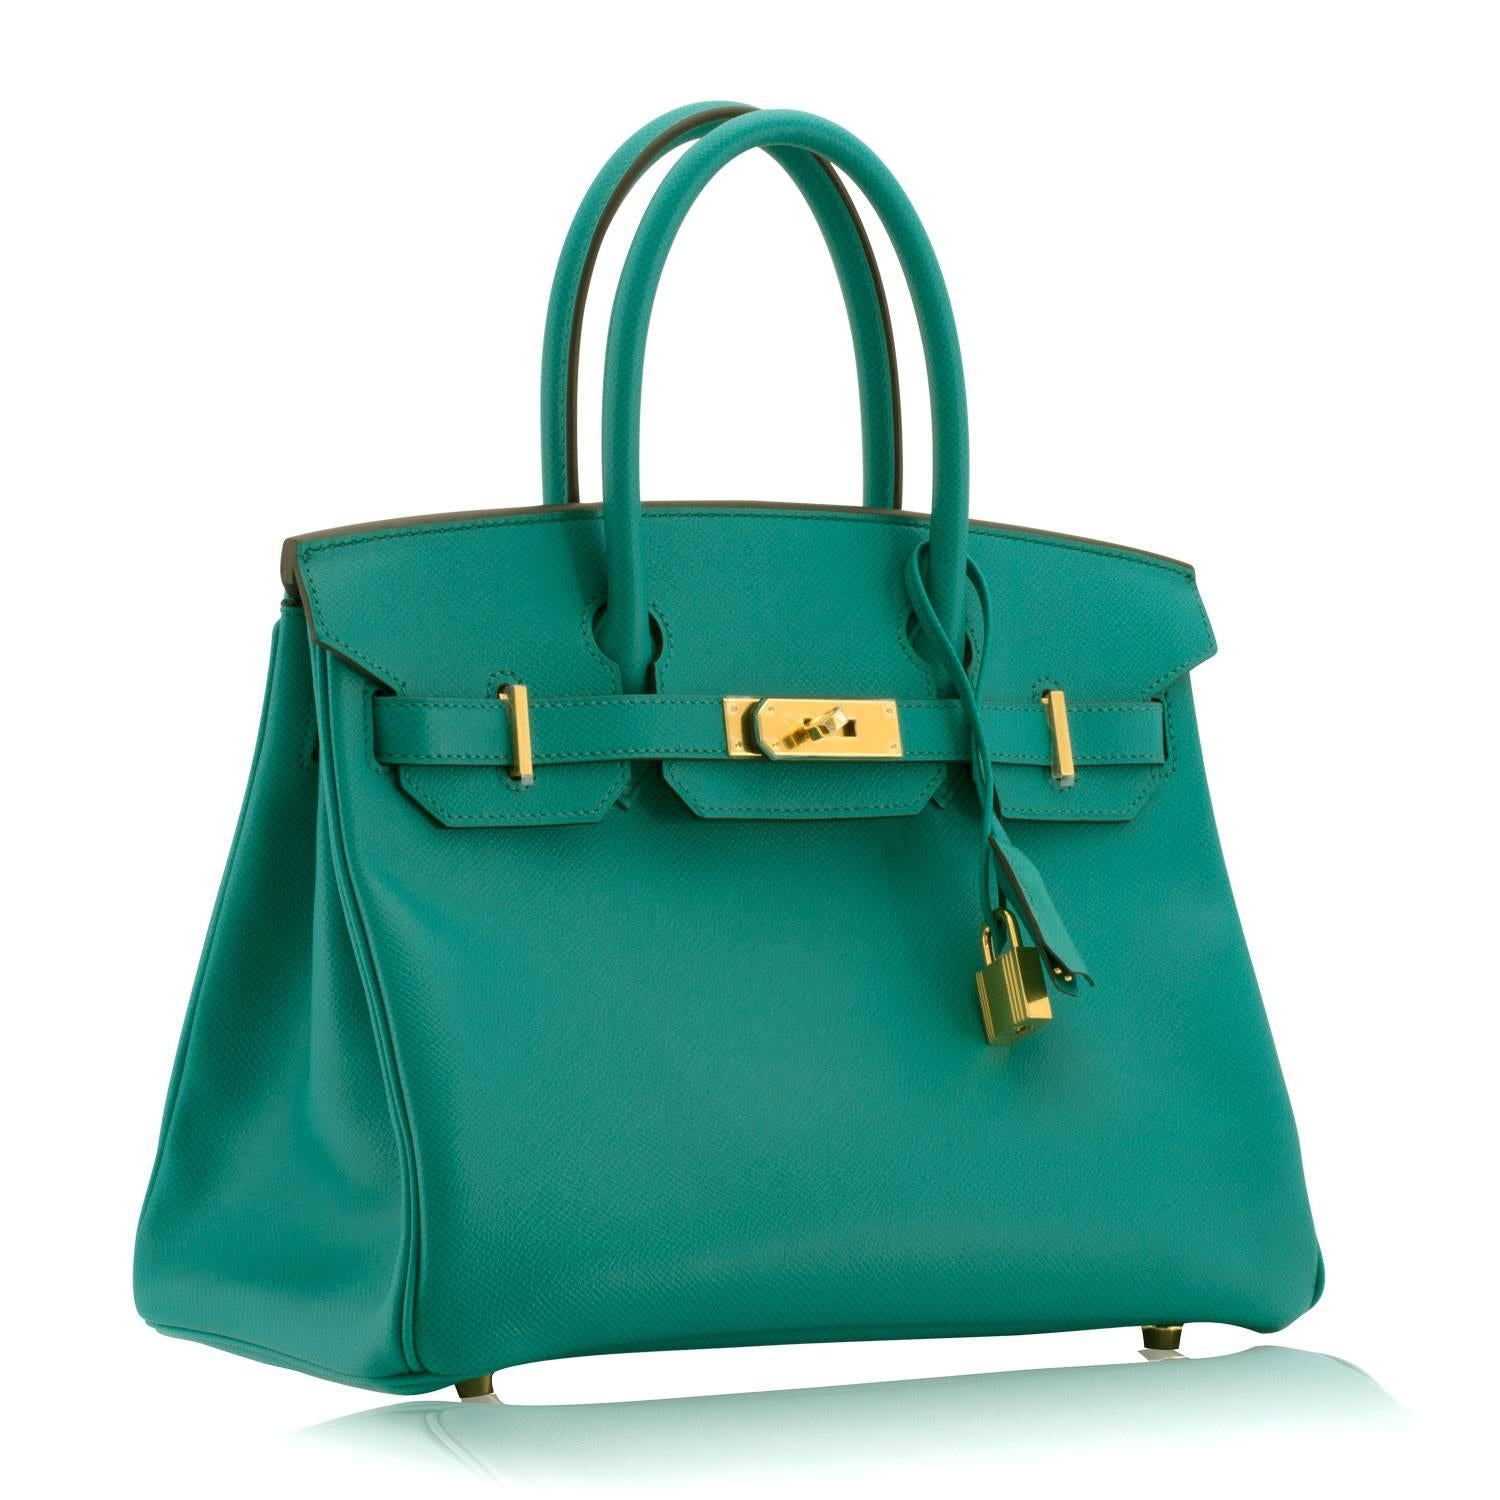 Hermes Handbag Birkin 30 Veau Epsom 7F Bleu Paon Gold Hardware 2016.

Pre-owned and never used.

Bought it in Hermes store in 2016.

Composition: Leather.

Model: Birkin.

Stamp; X

Size: 30cm width x 22cm height x 16cm length

Color: